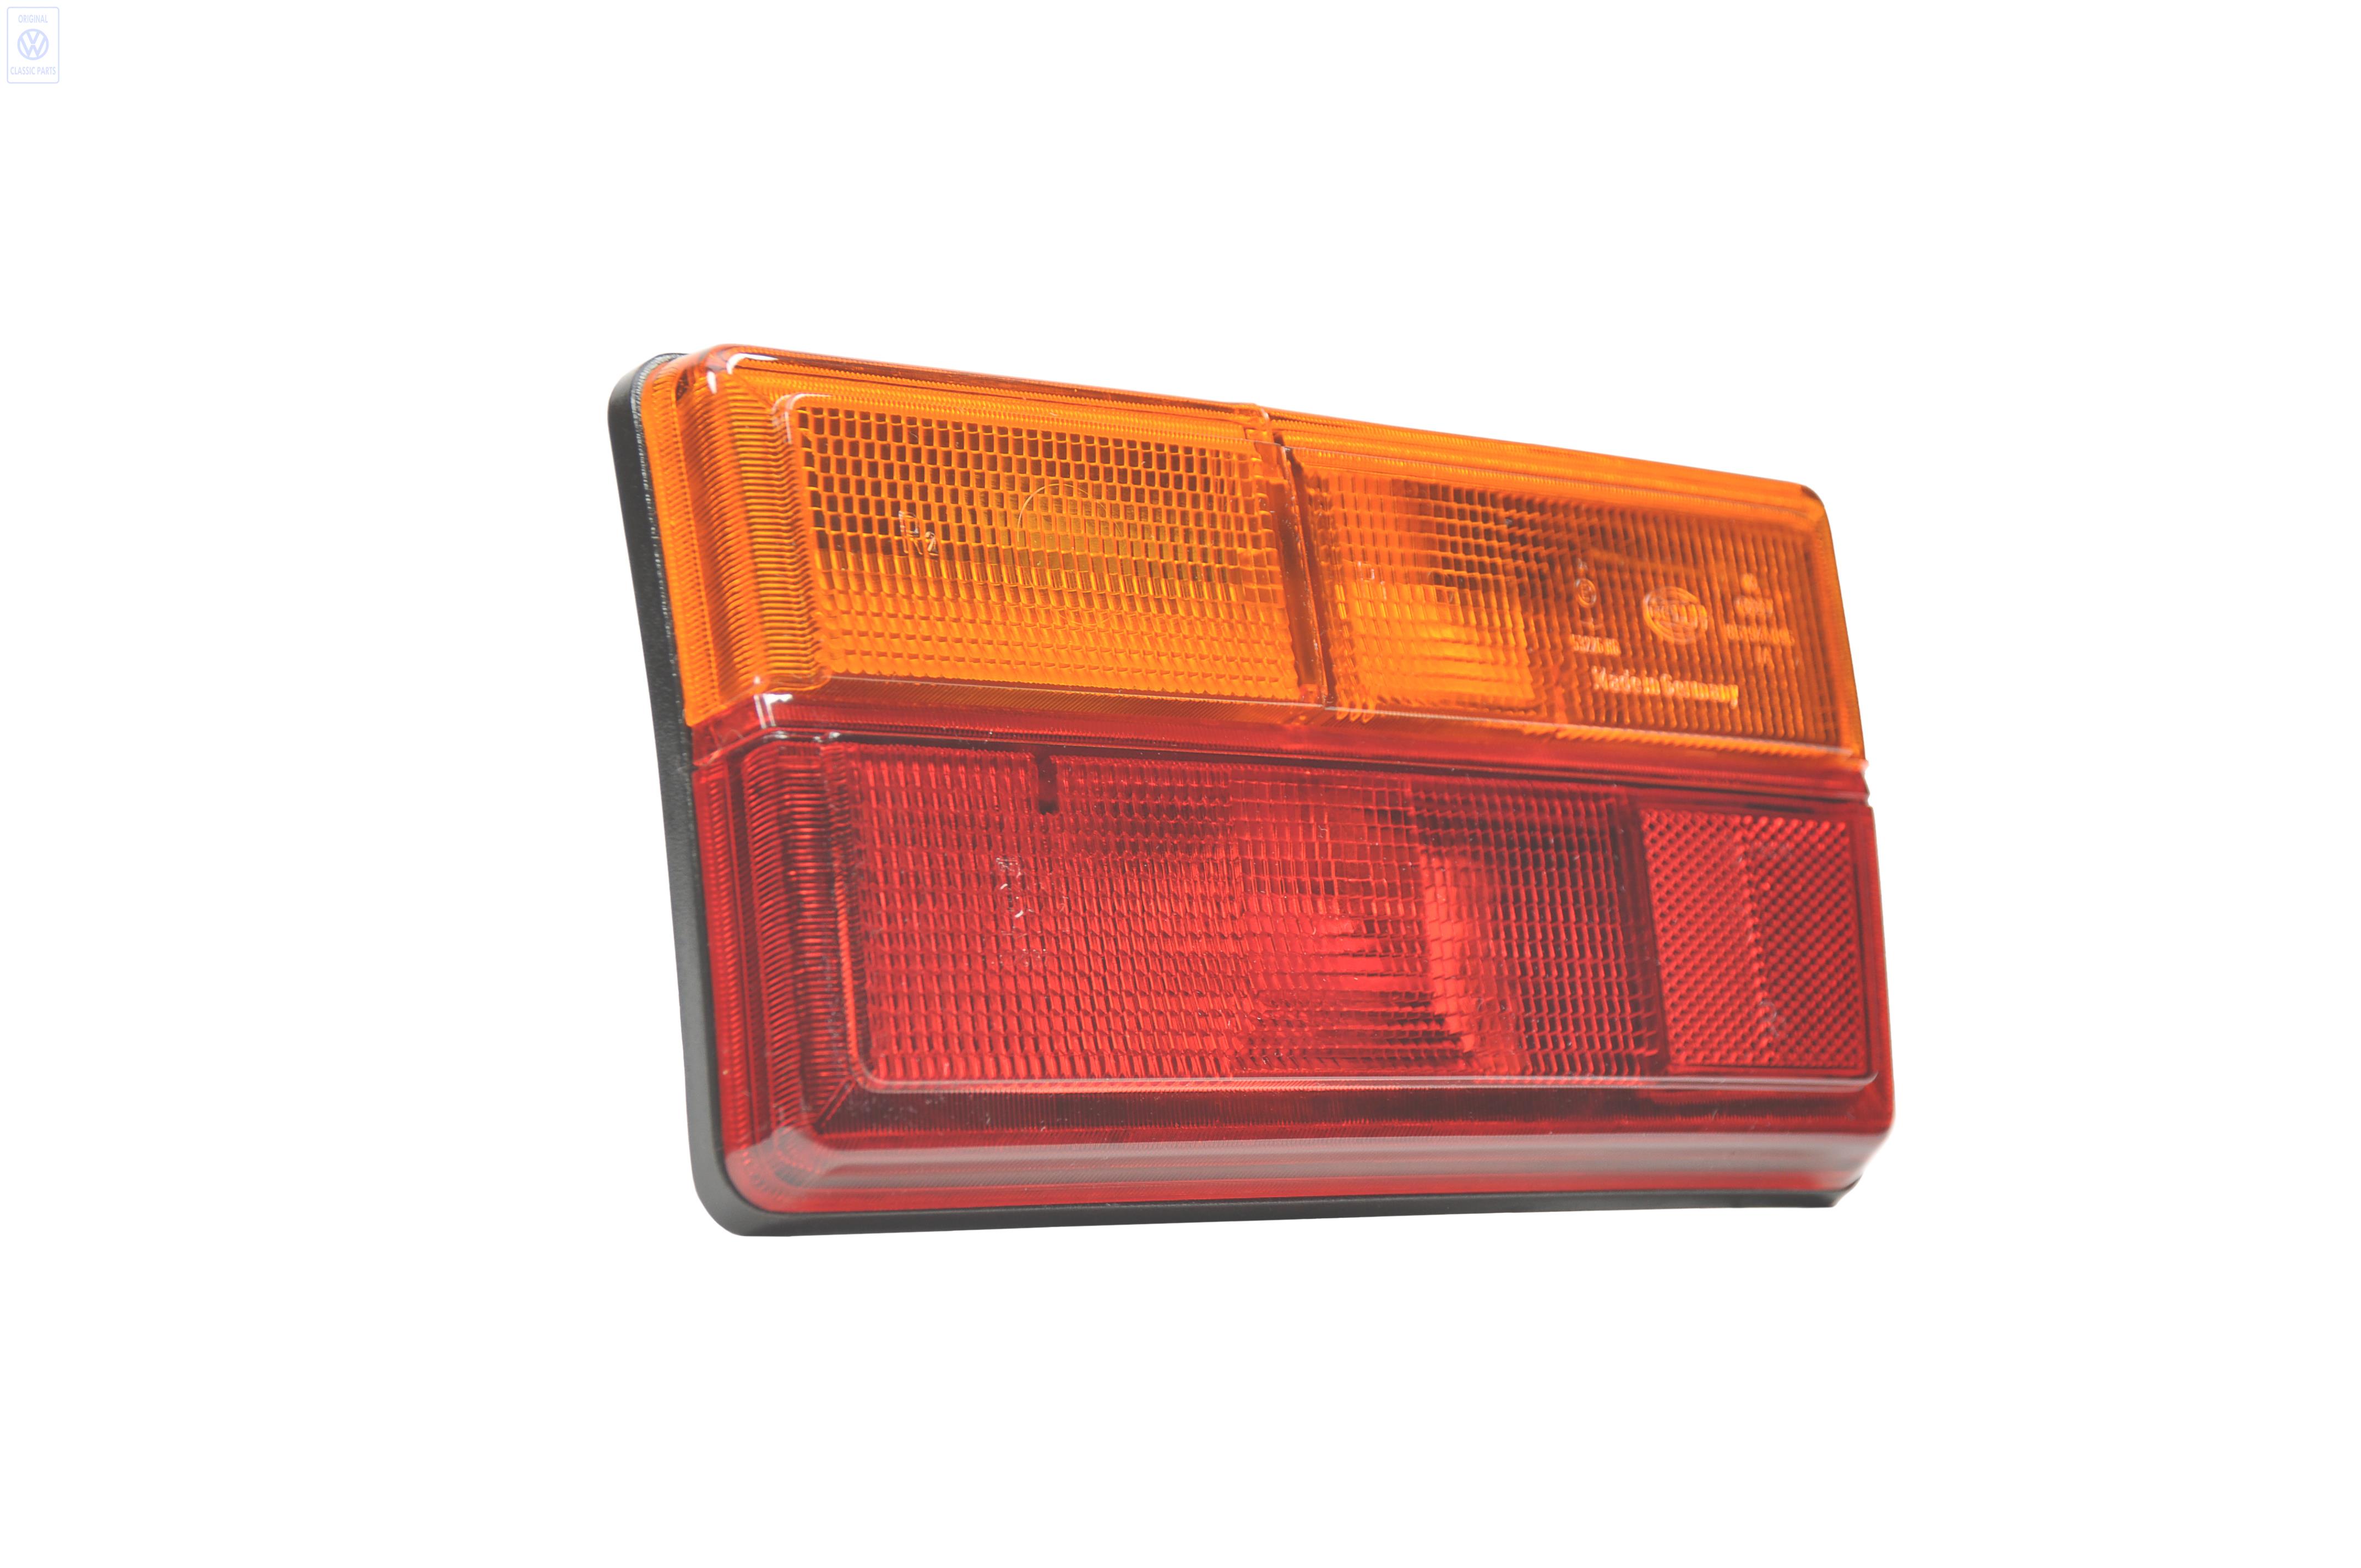 Tail light for VW Polo Mk1 / Derby Mk1